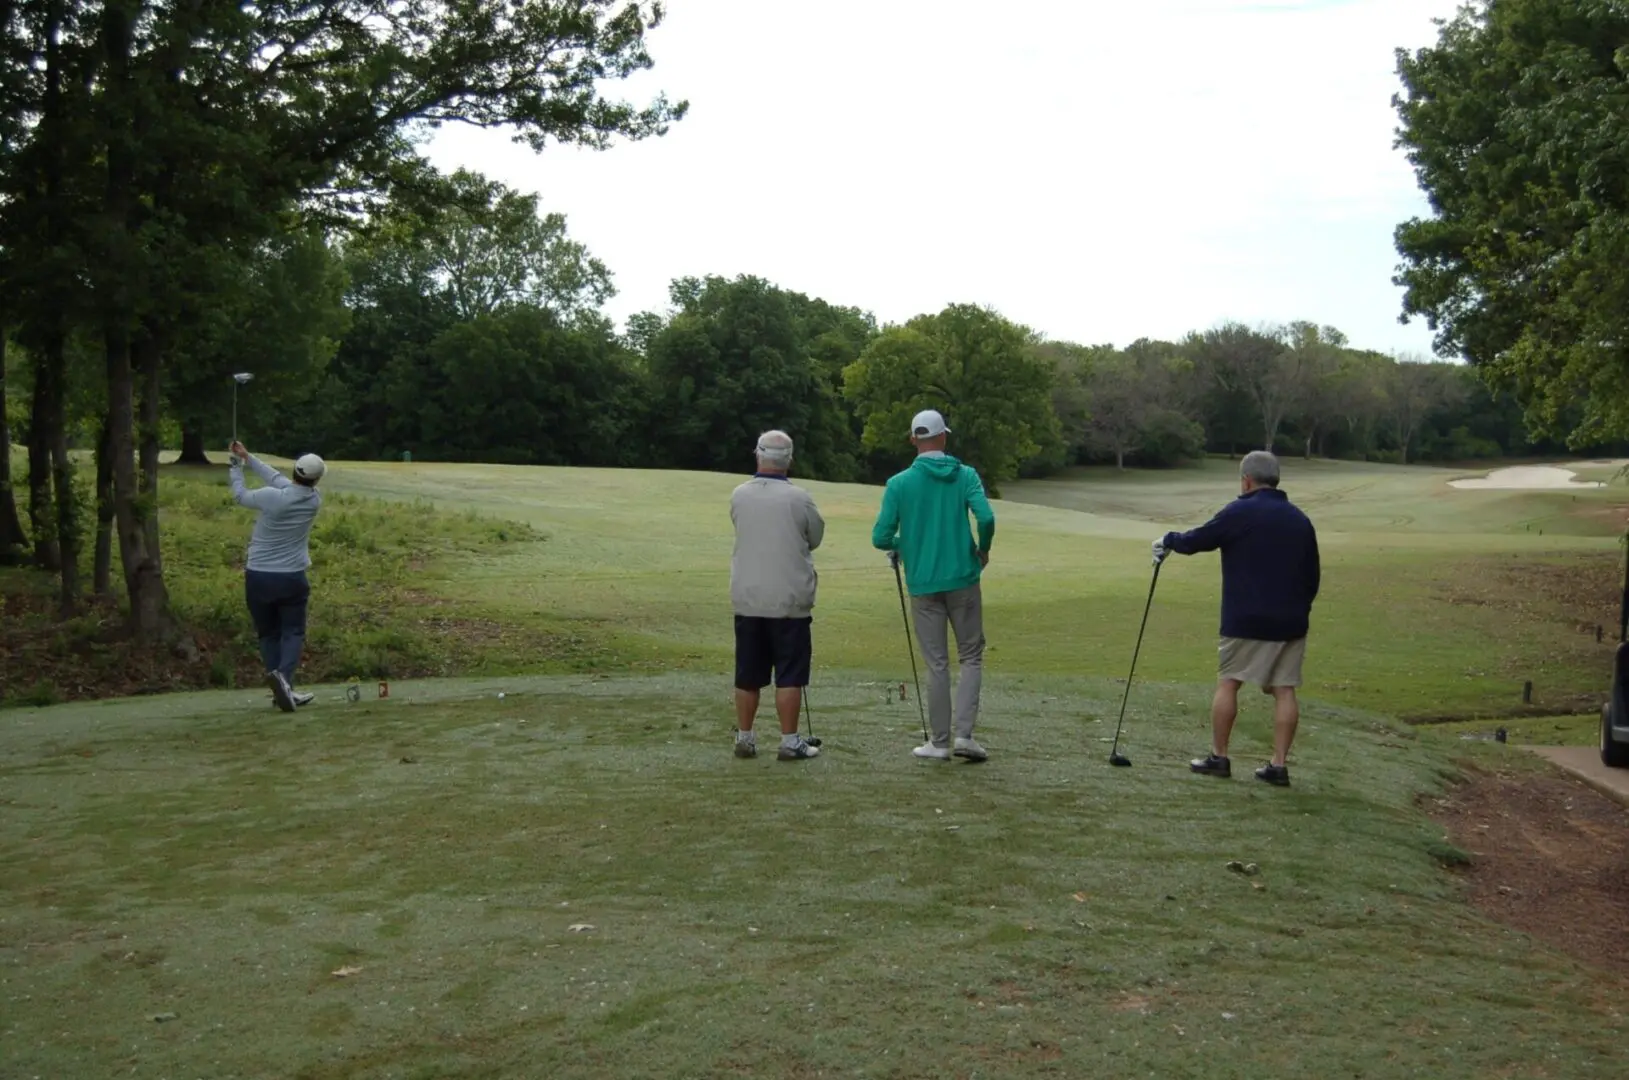 A group of people playing golf on a golf course.